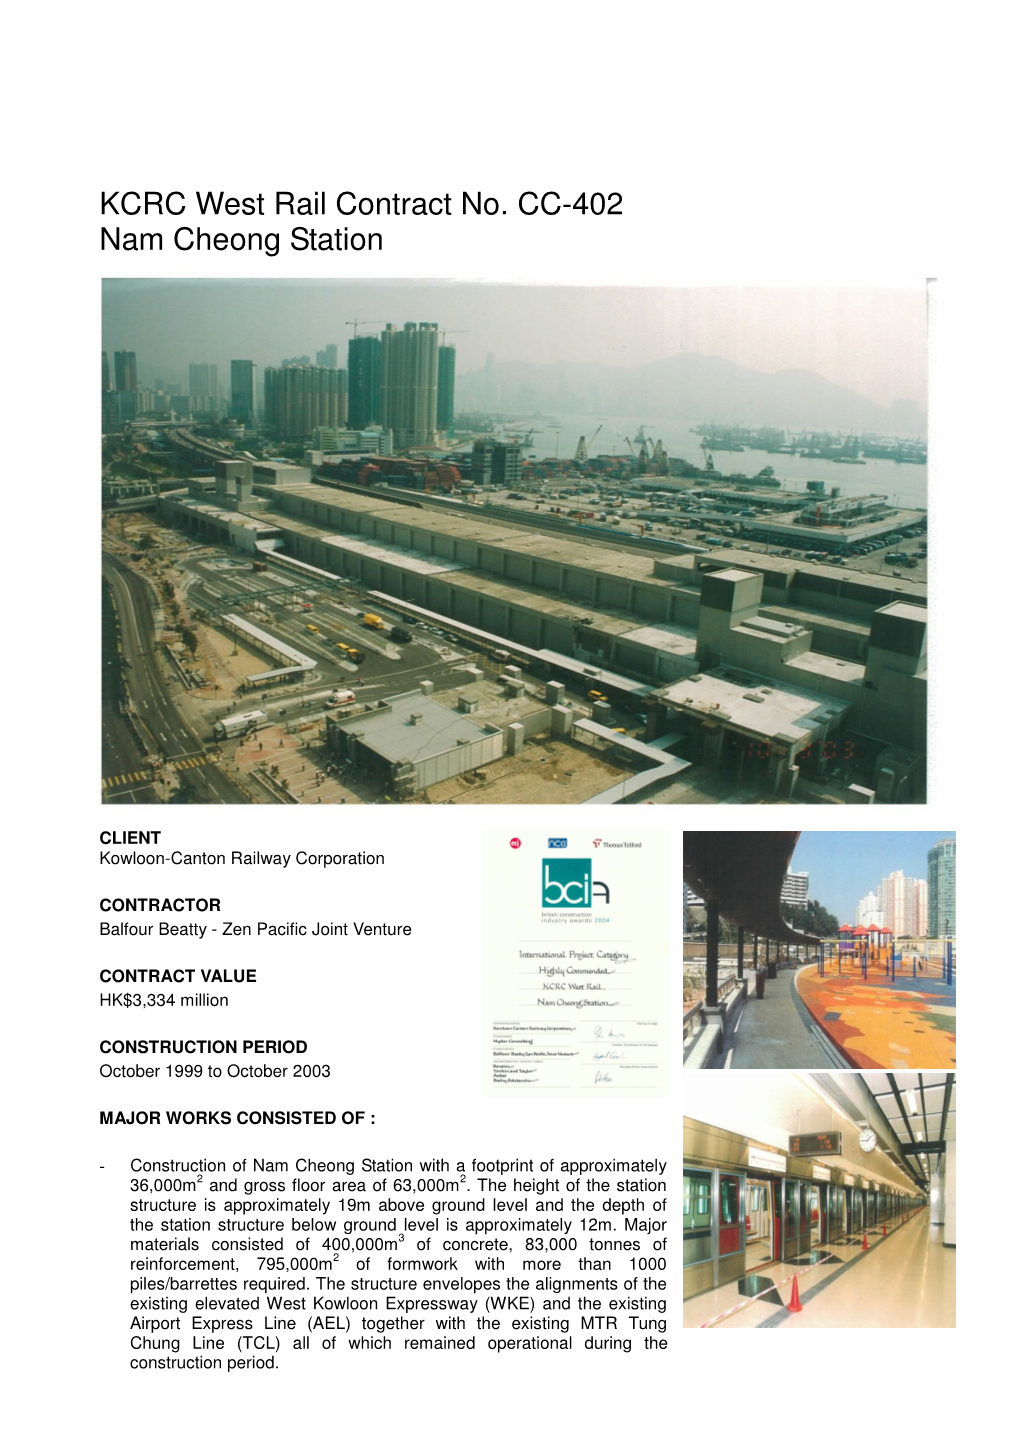 KCRC West Rail Contract No. CC-402 Nam Cheong Station